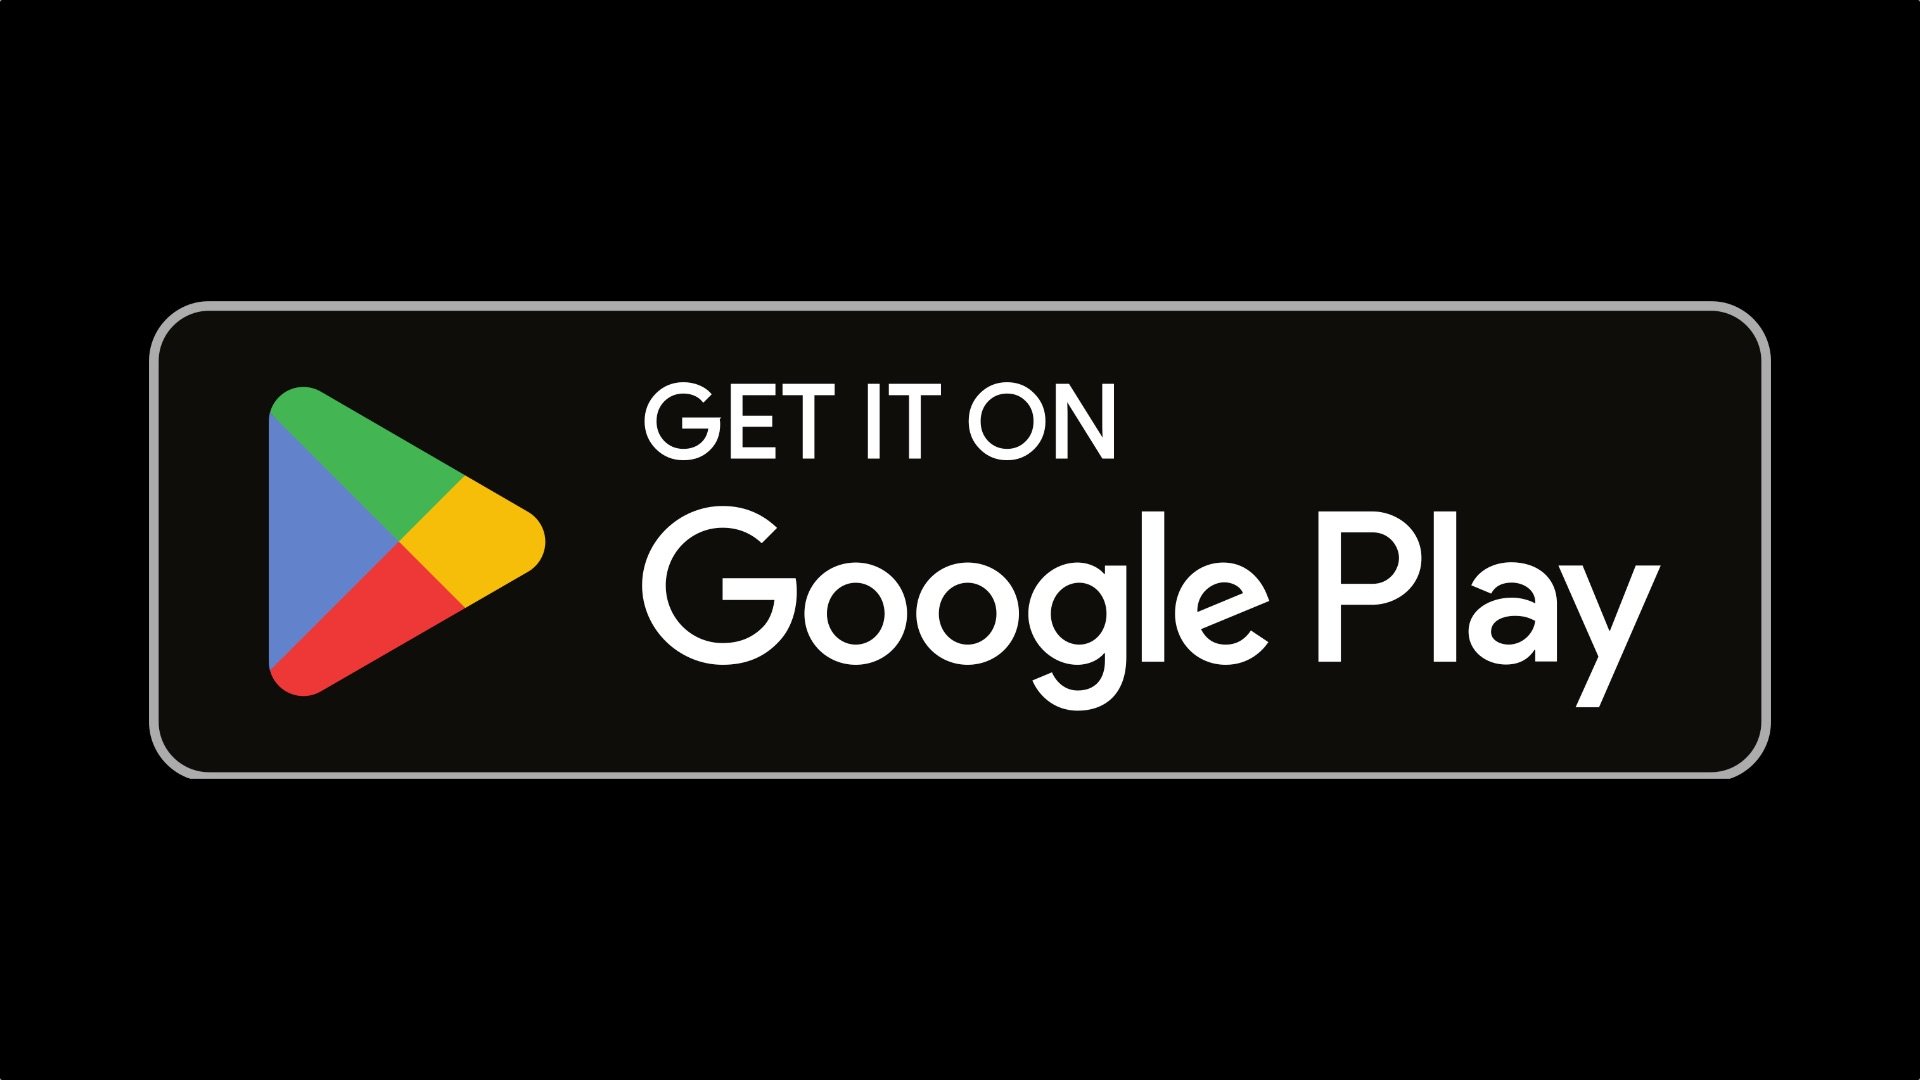 NOW – Apps on Google Play